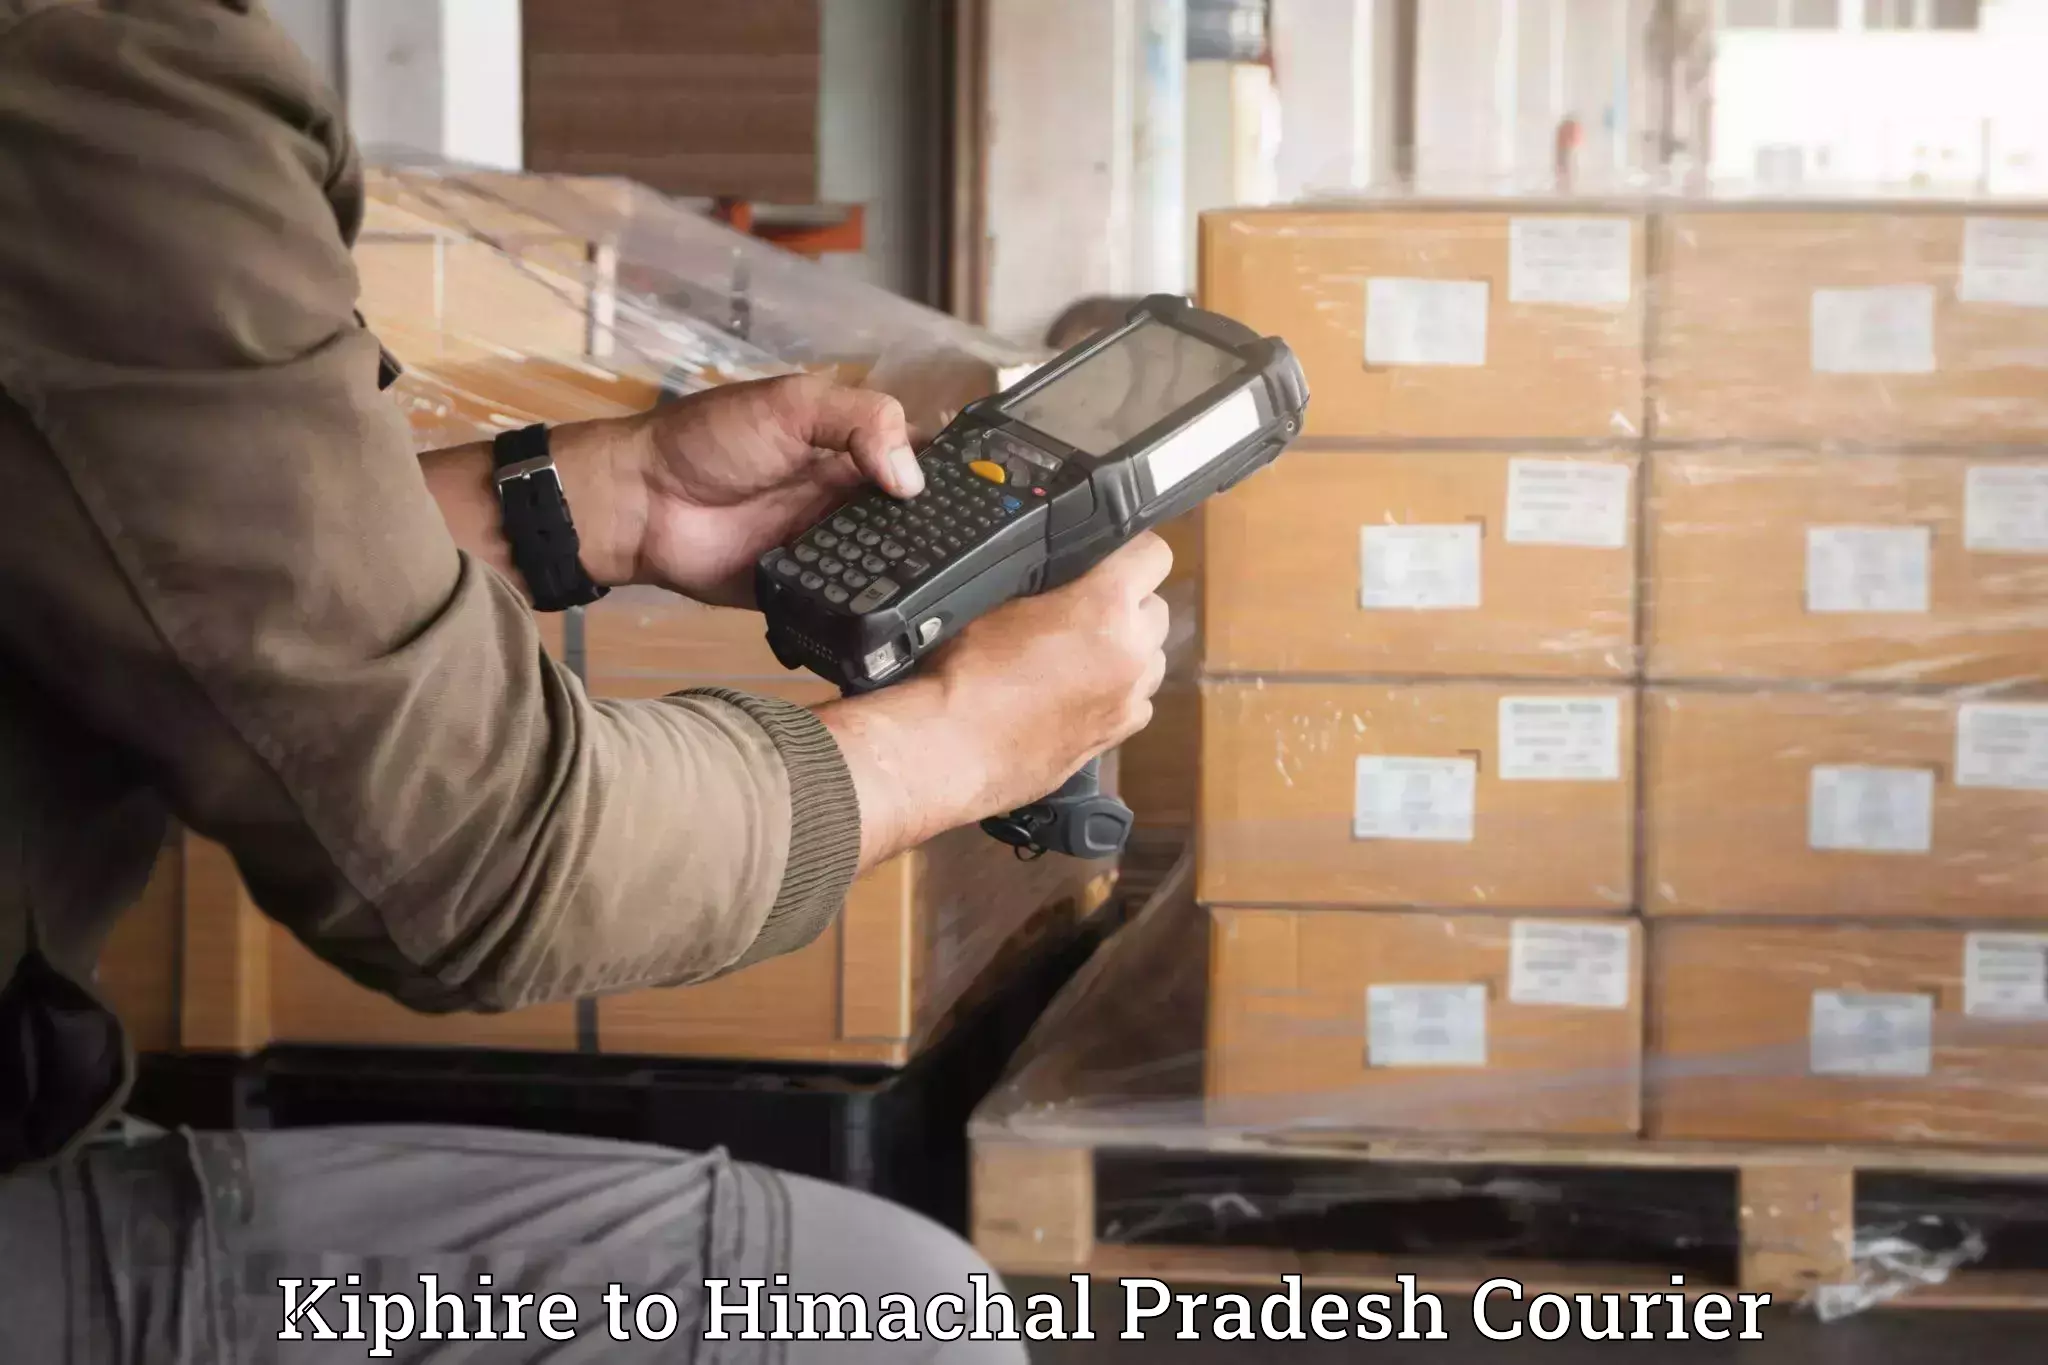 Furniture relocation experts Kiphire to Himachal Pradesh